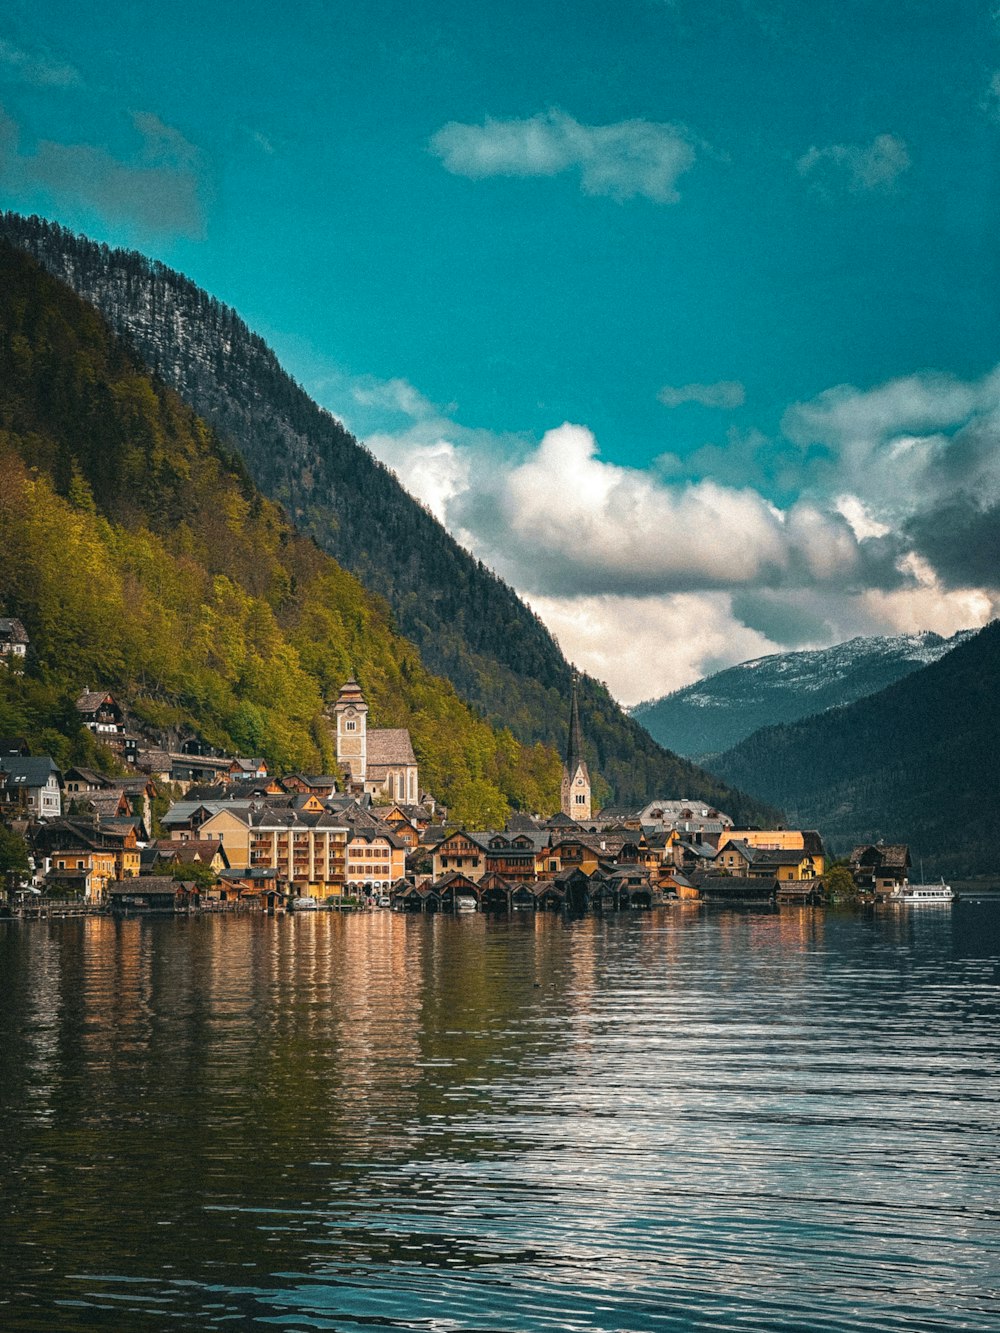 a small village on the shore of a lake